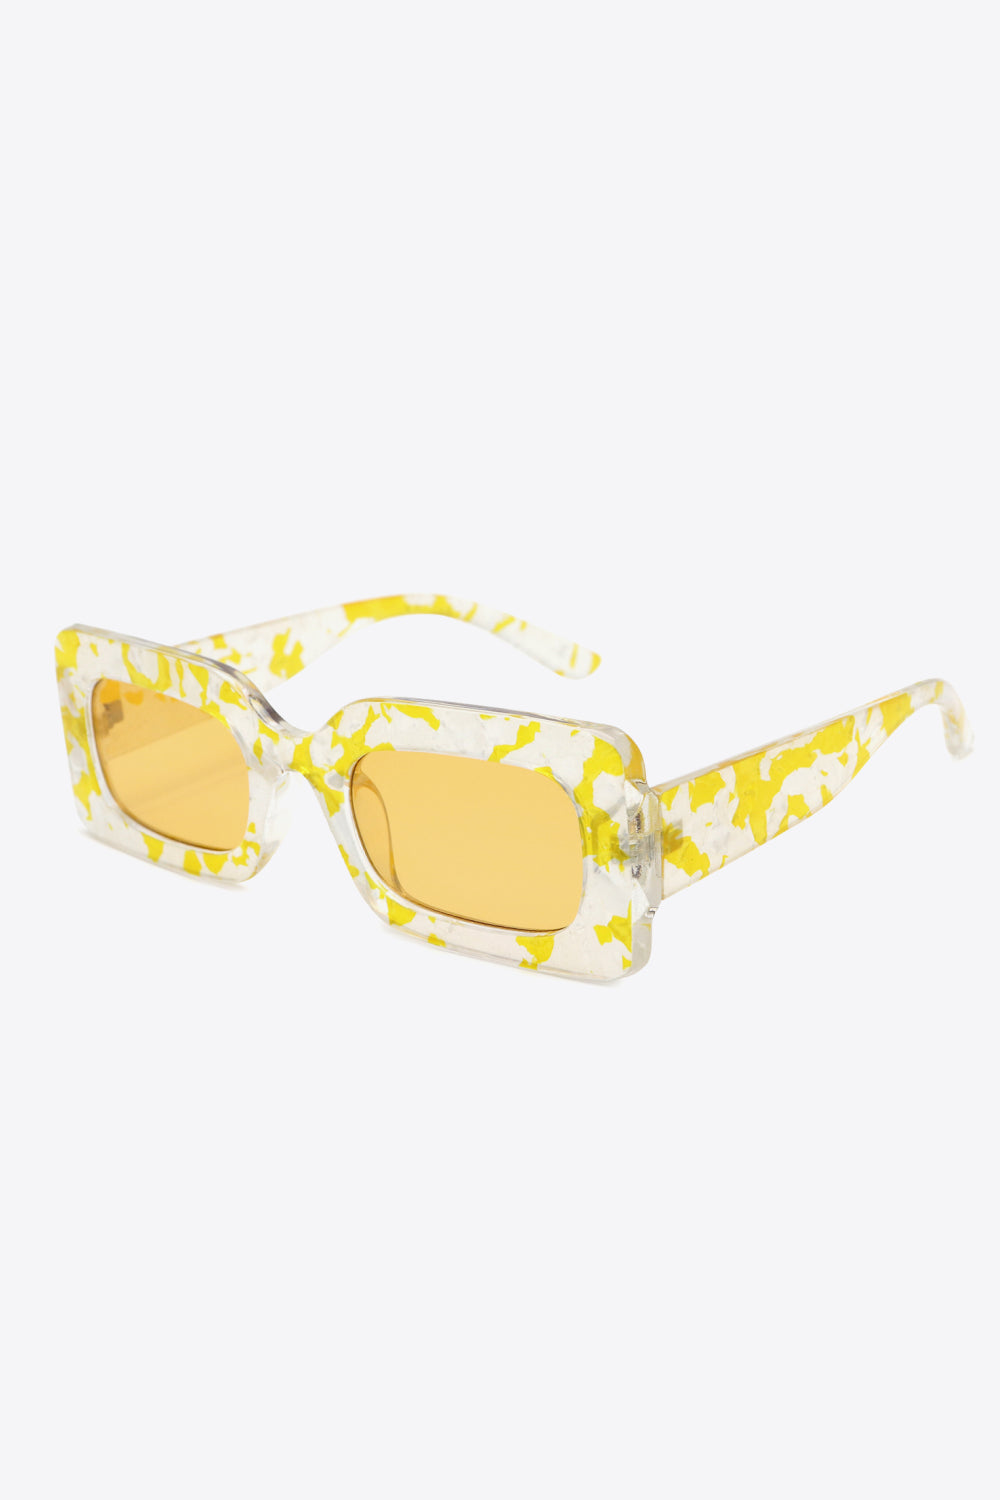 BUTTER YELLOW ONE SIZE - Tortoiseshell Rectangle Polycarbonate Sunglasses - 2 colors - Sunglasses at TFC&H Co.